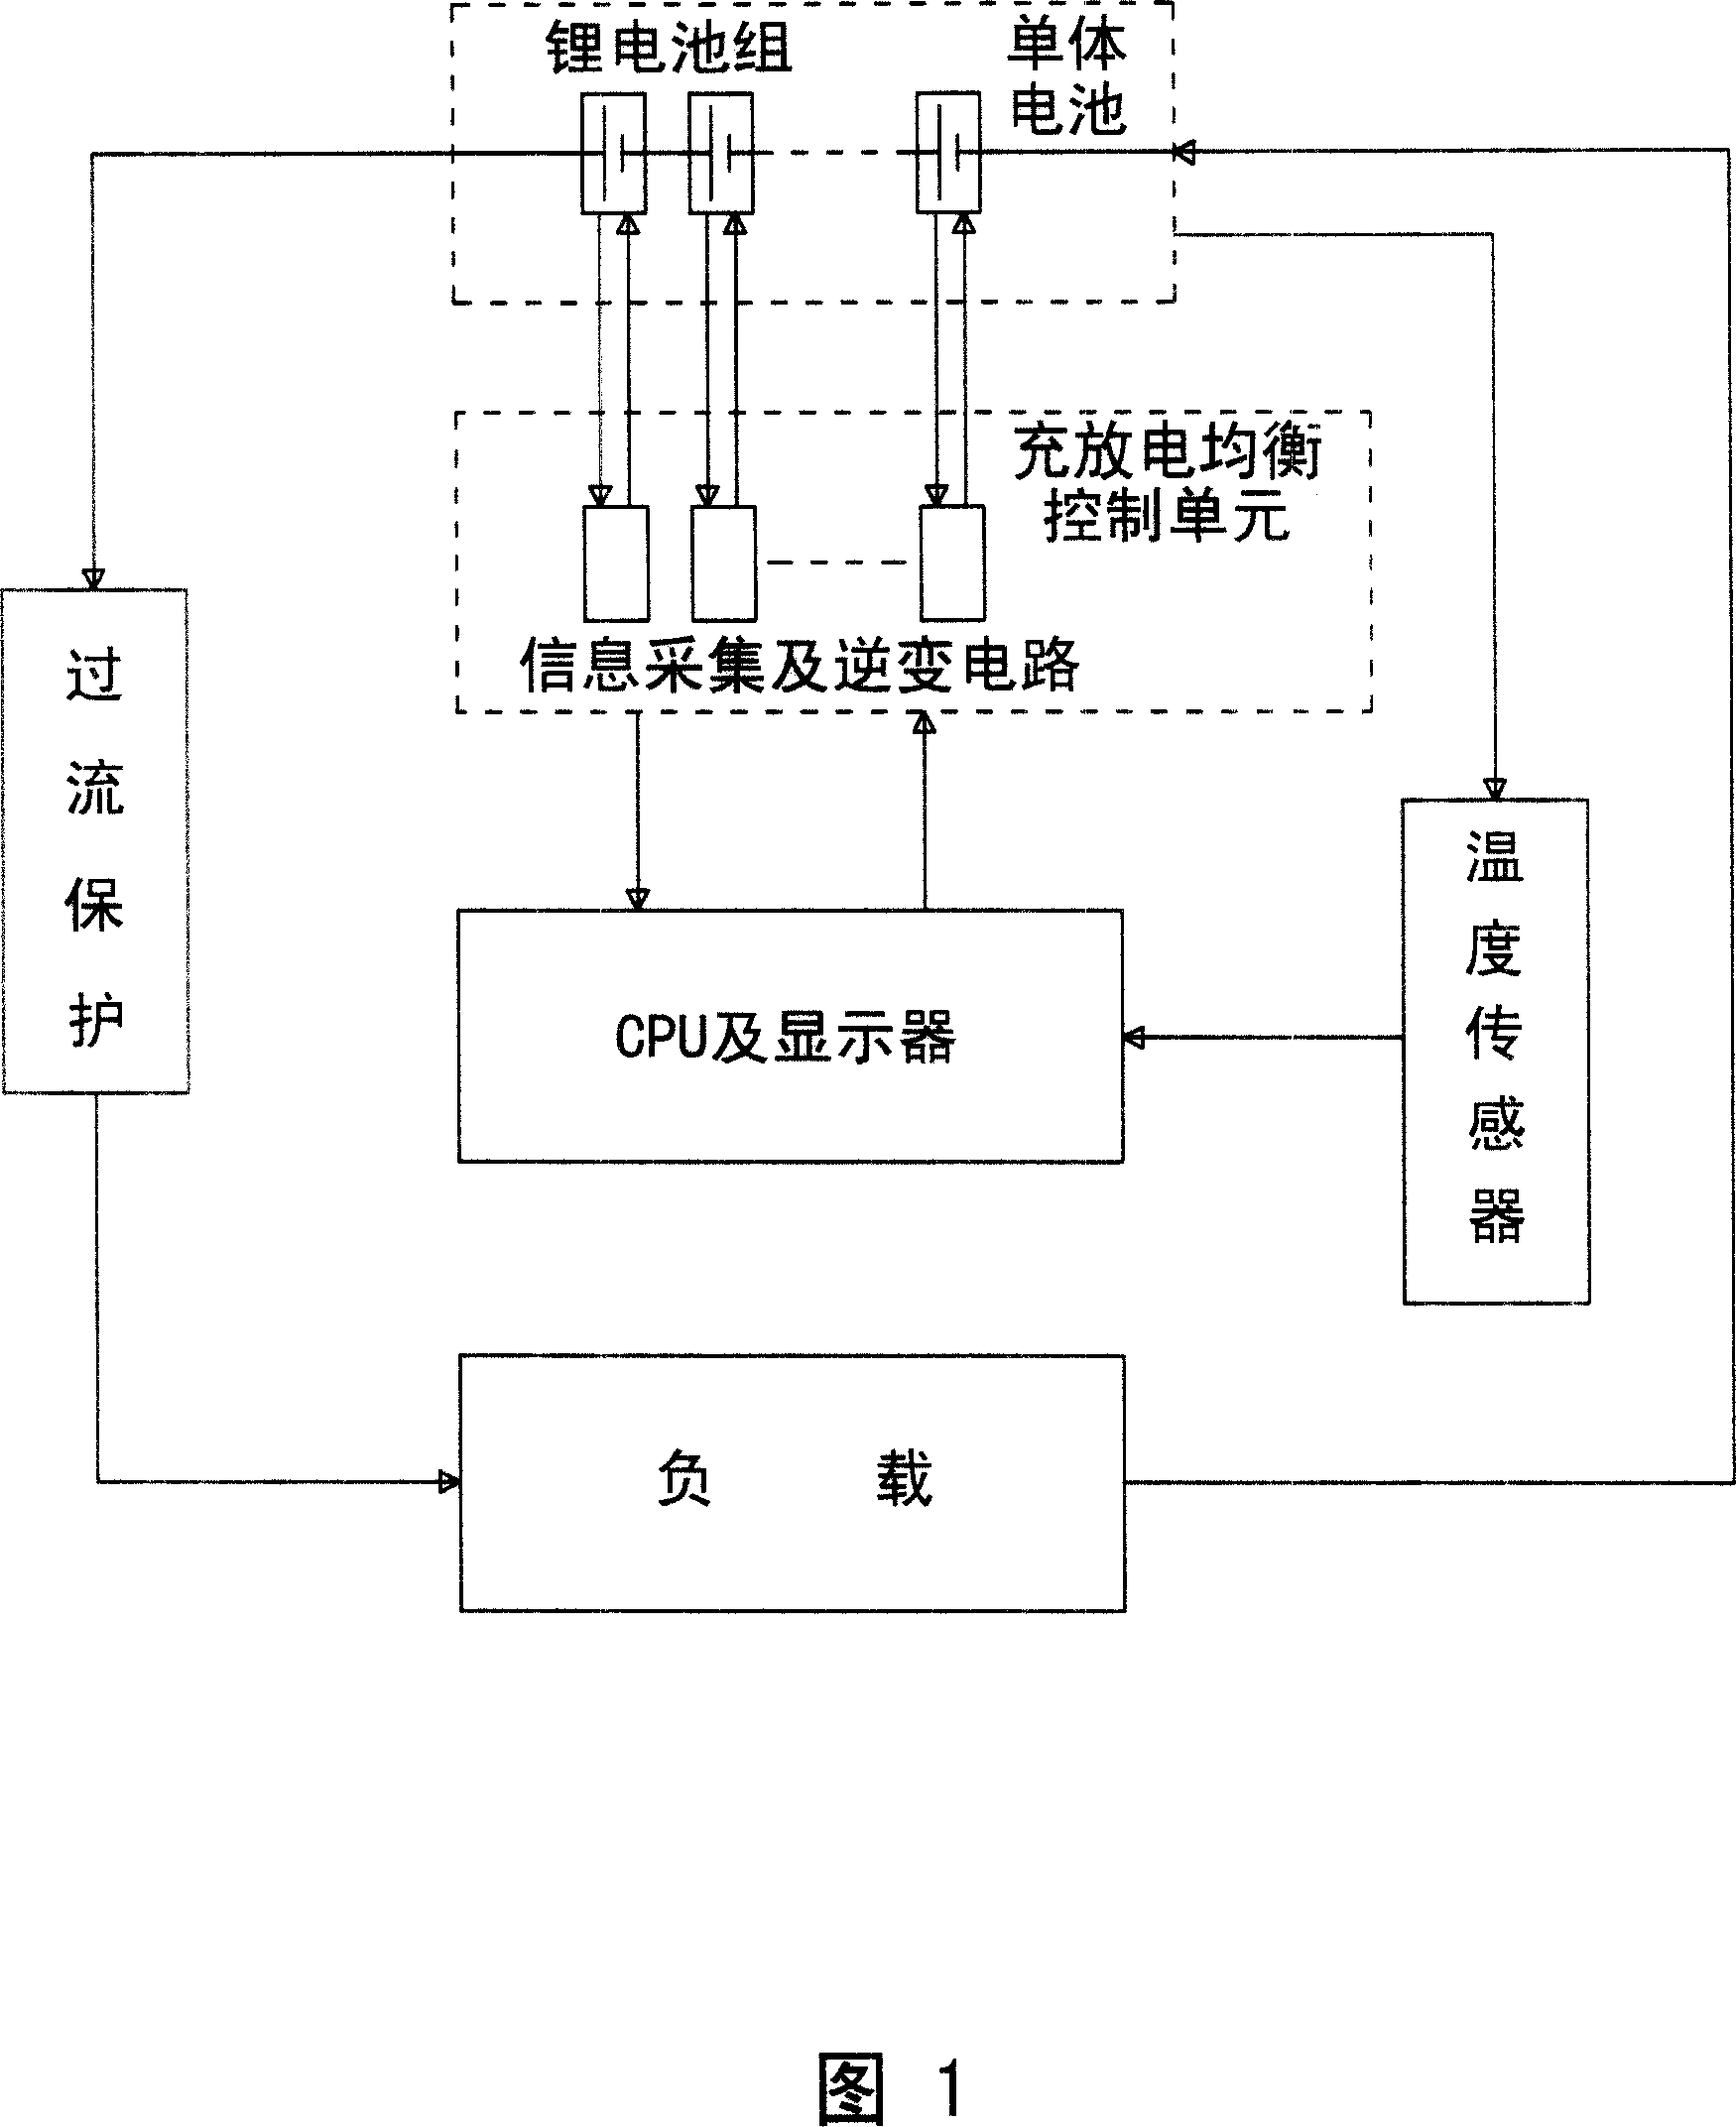 Charging-discharging automatic balancing method for serial power lithium battery